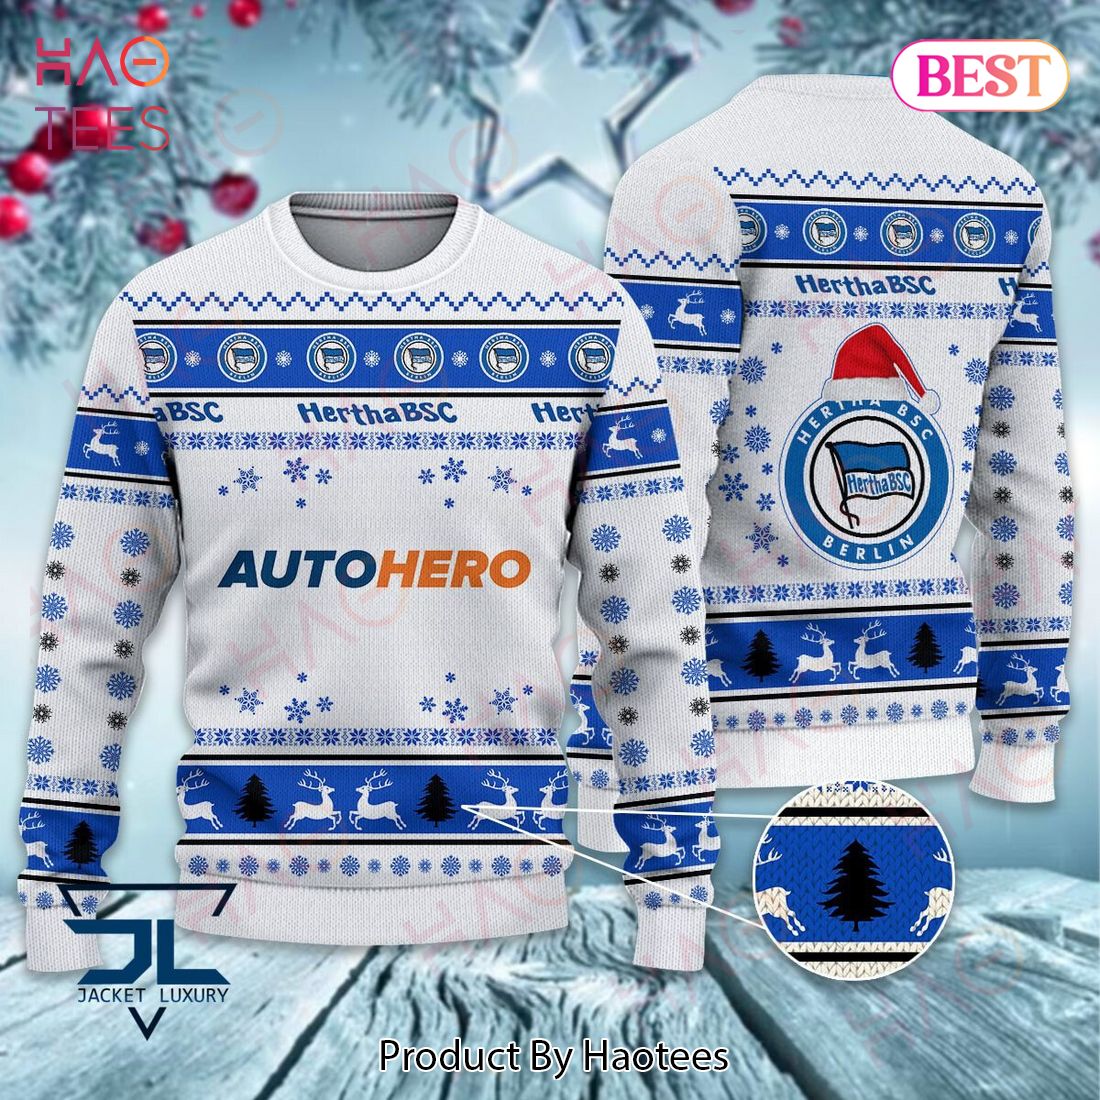 HOT Hertha BSC Luxury Brand Sweater Limited Edition